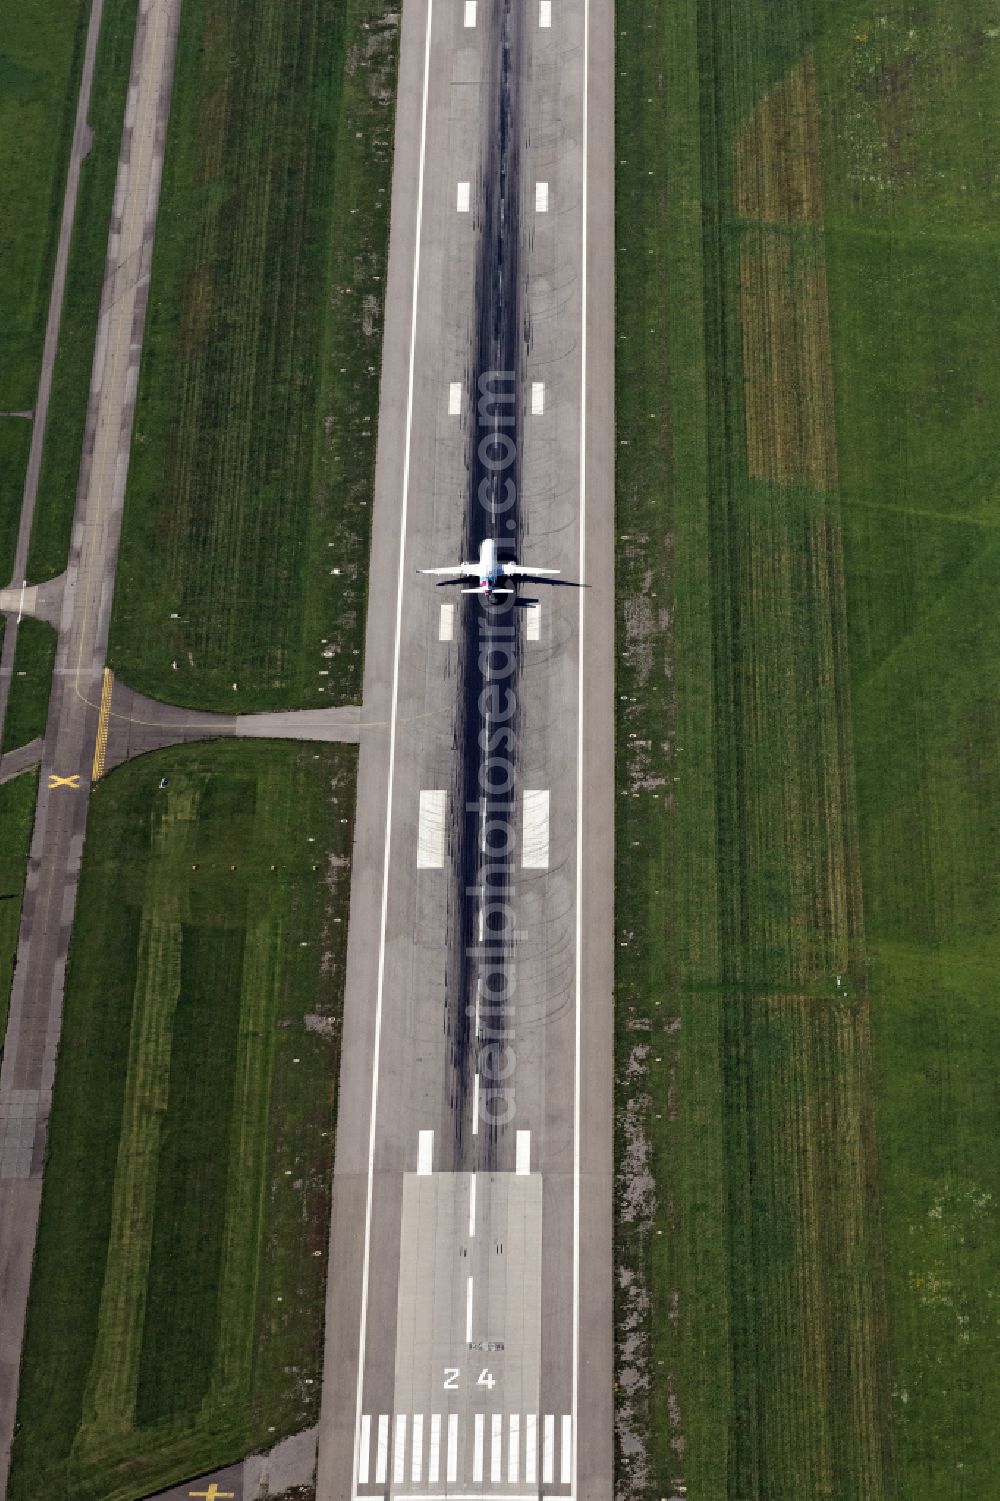 Aerial photograph Ungerhausen - Airliner - Passenger aircraft A320 von Eurowings at the start and climb over the airport in Ungerhausen in the state Bavaria, Germany